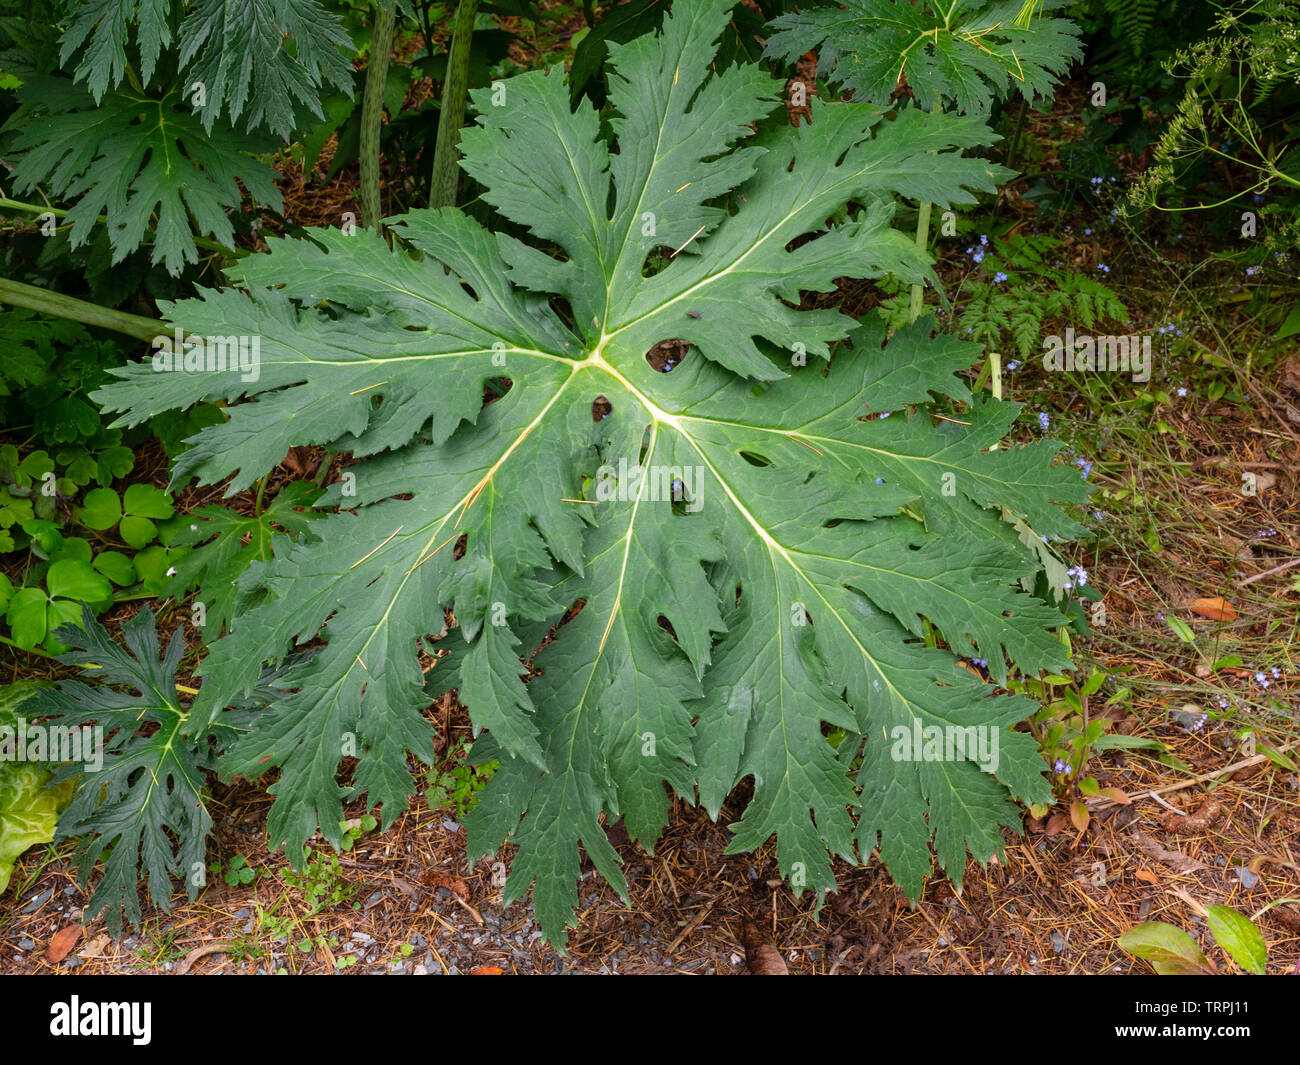 Large, incised leaf of the hardy perennial Ligularia japonica 'Chinese Dragon' Stock Photo